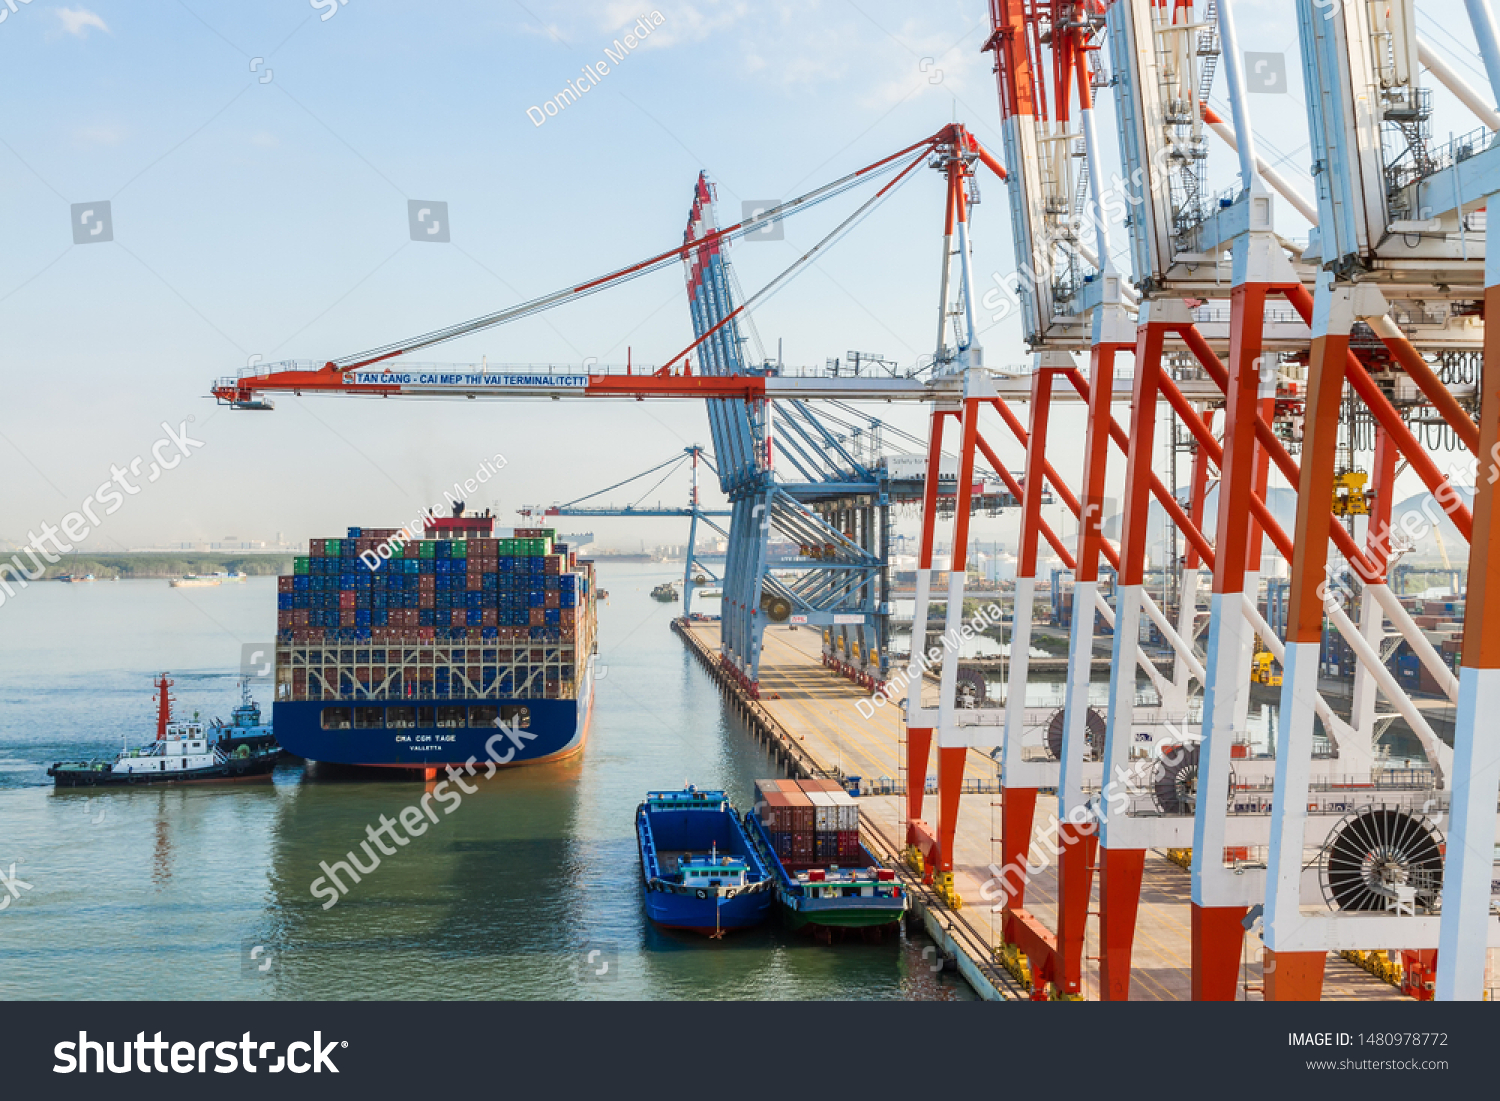 PHY MY PORT, SOUTH VIETNAM - JANUARY 14, 2019: A containership registered in Valletta (Malta) docking at International Container Terminal Tan Cang - Cai Mep. #1480978772